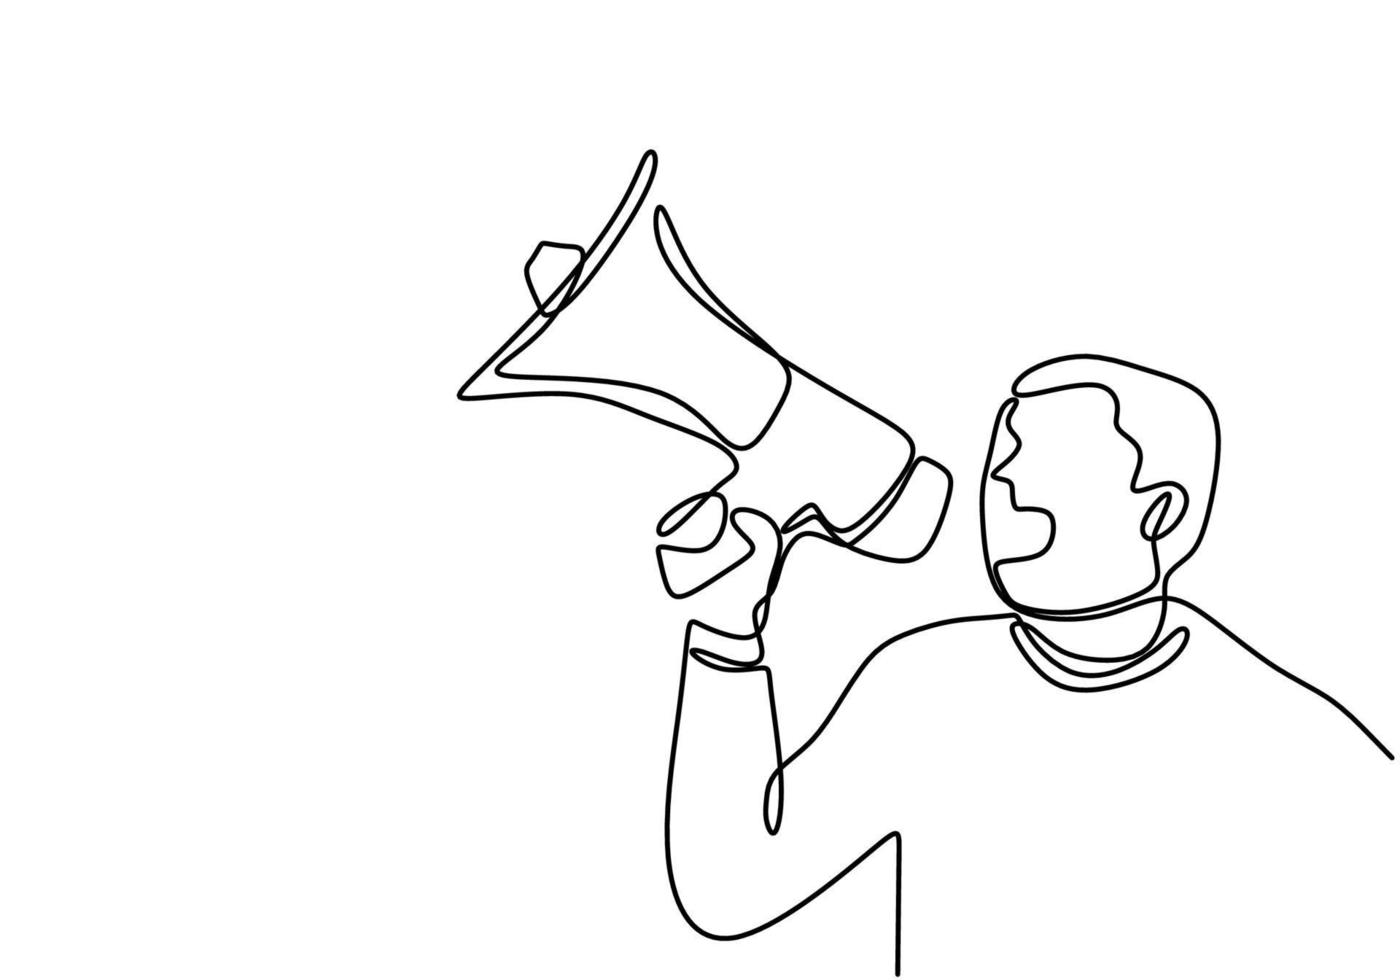 Continuous one line drawn a man talking into a loudspeaker. A male spoke excitedly while holding the megaphone. The concept of announcement, warning, oratory, eloquence, loud statement, publicity vector